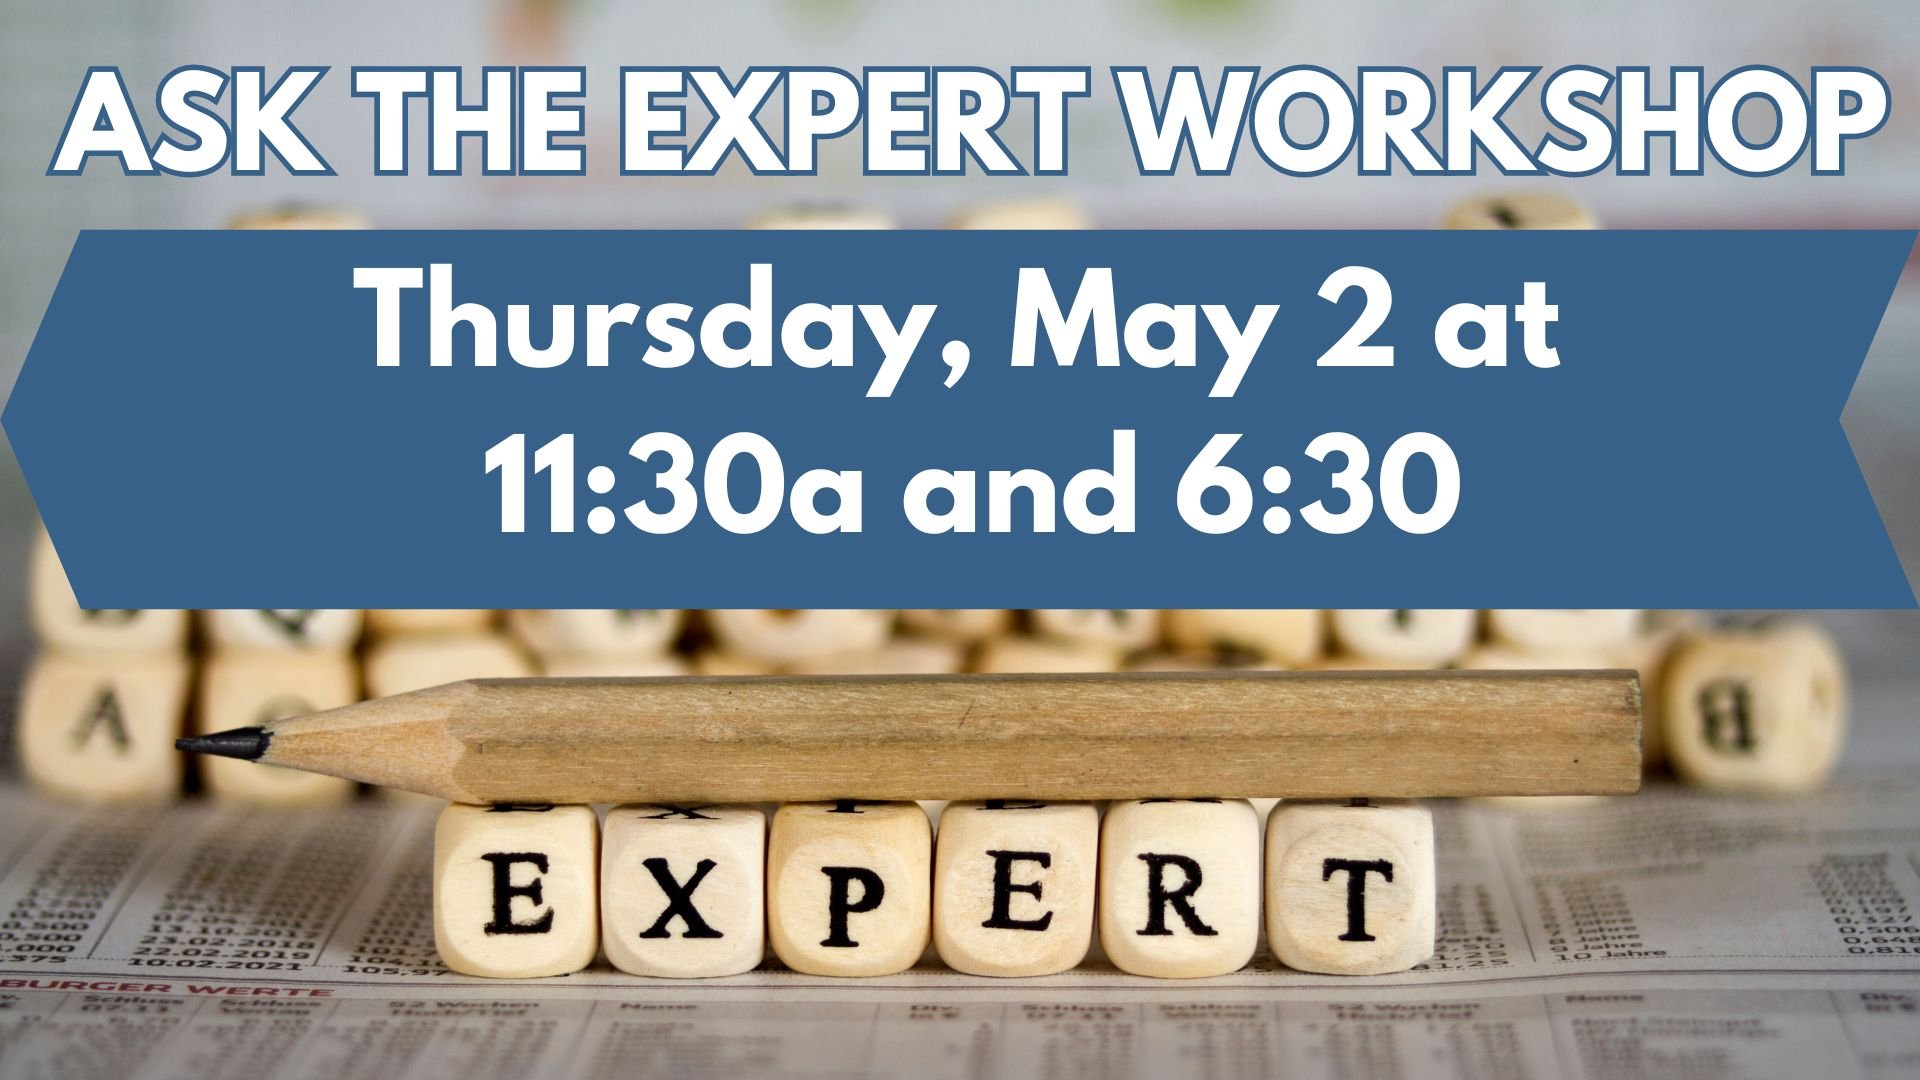 ASK THE EXPERT WORKSHOP Thursday, May 2 at 1130a and 630p.jpg